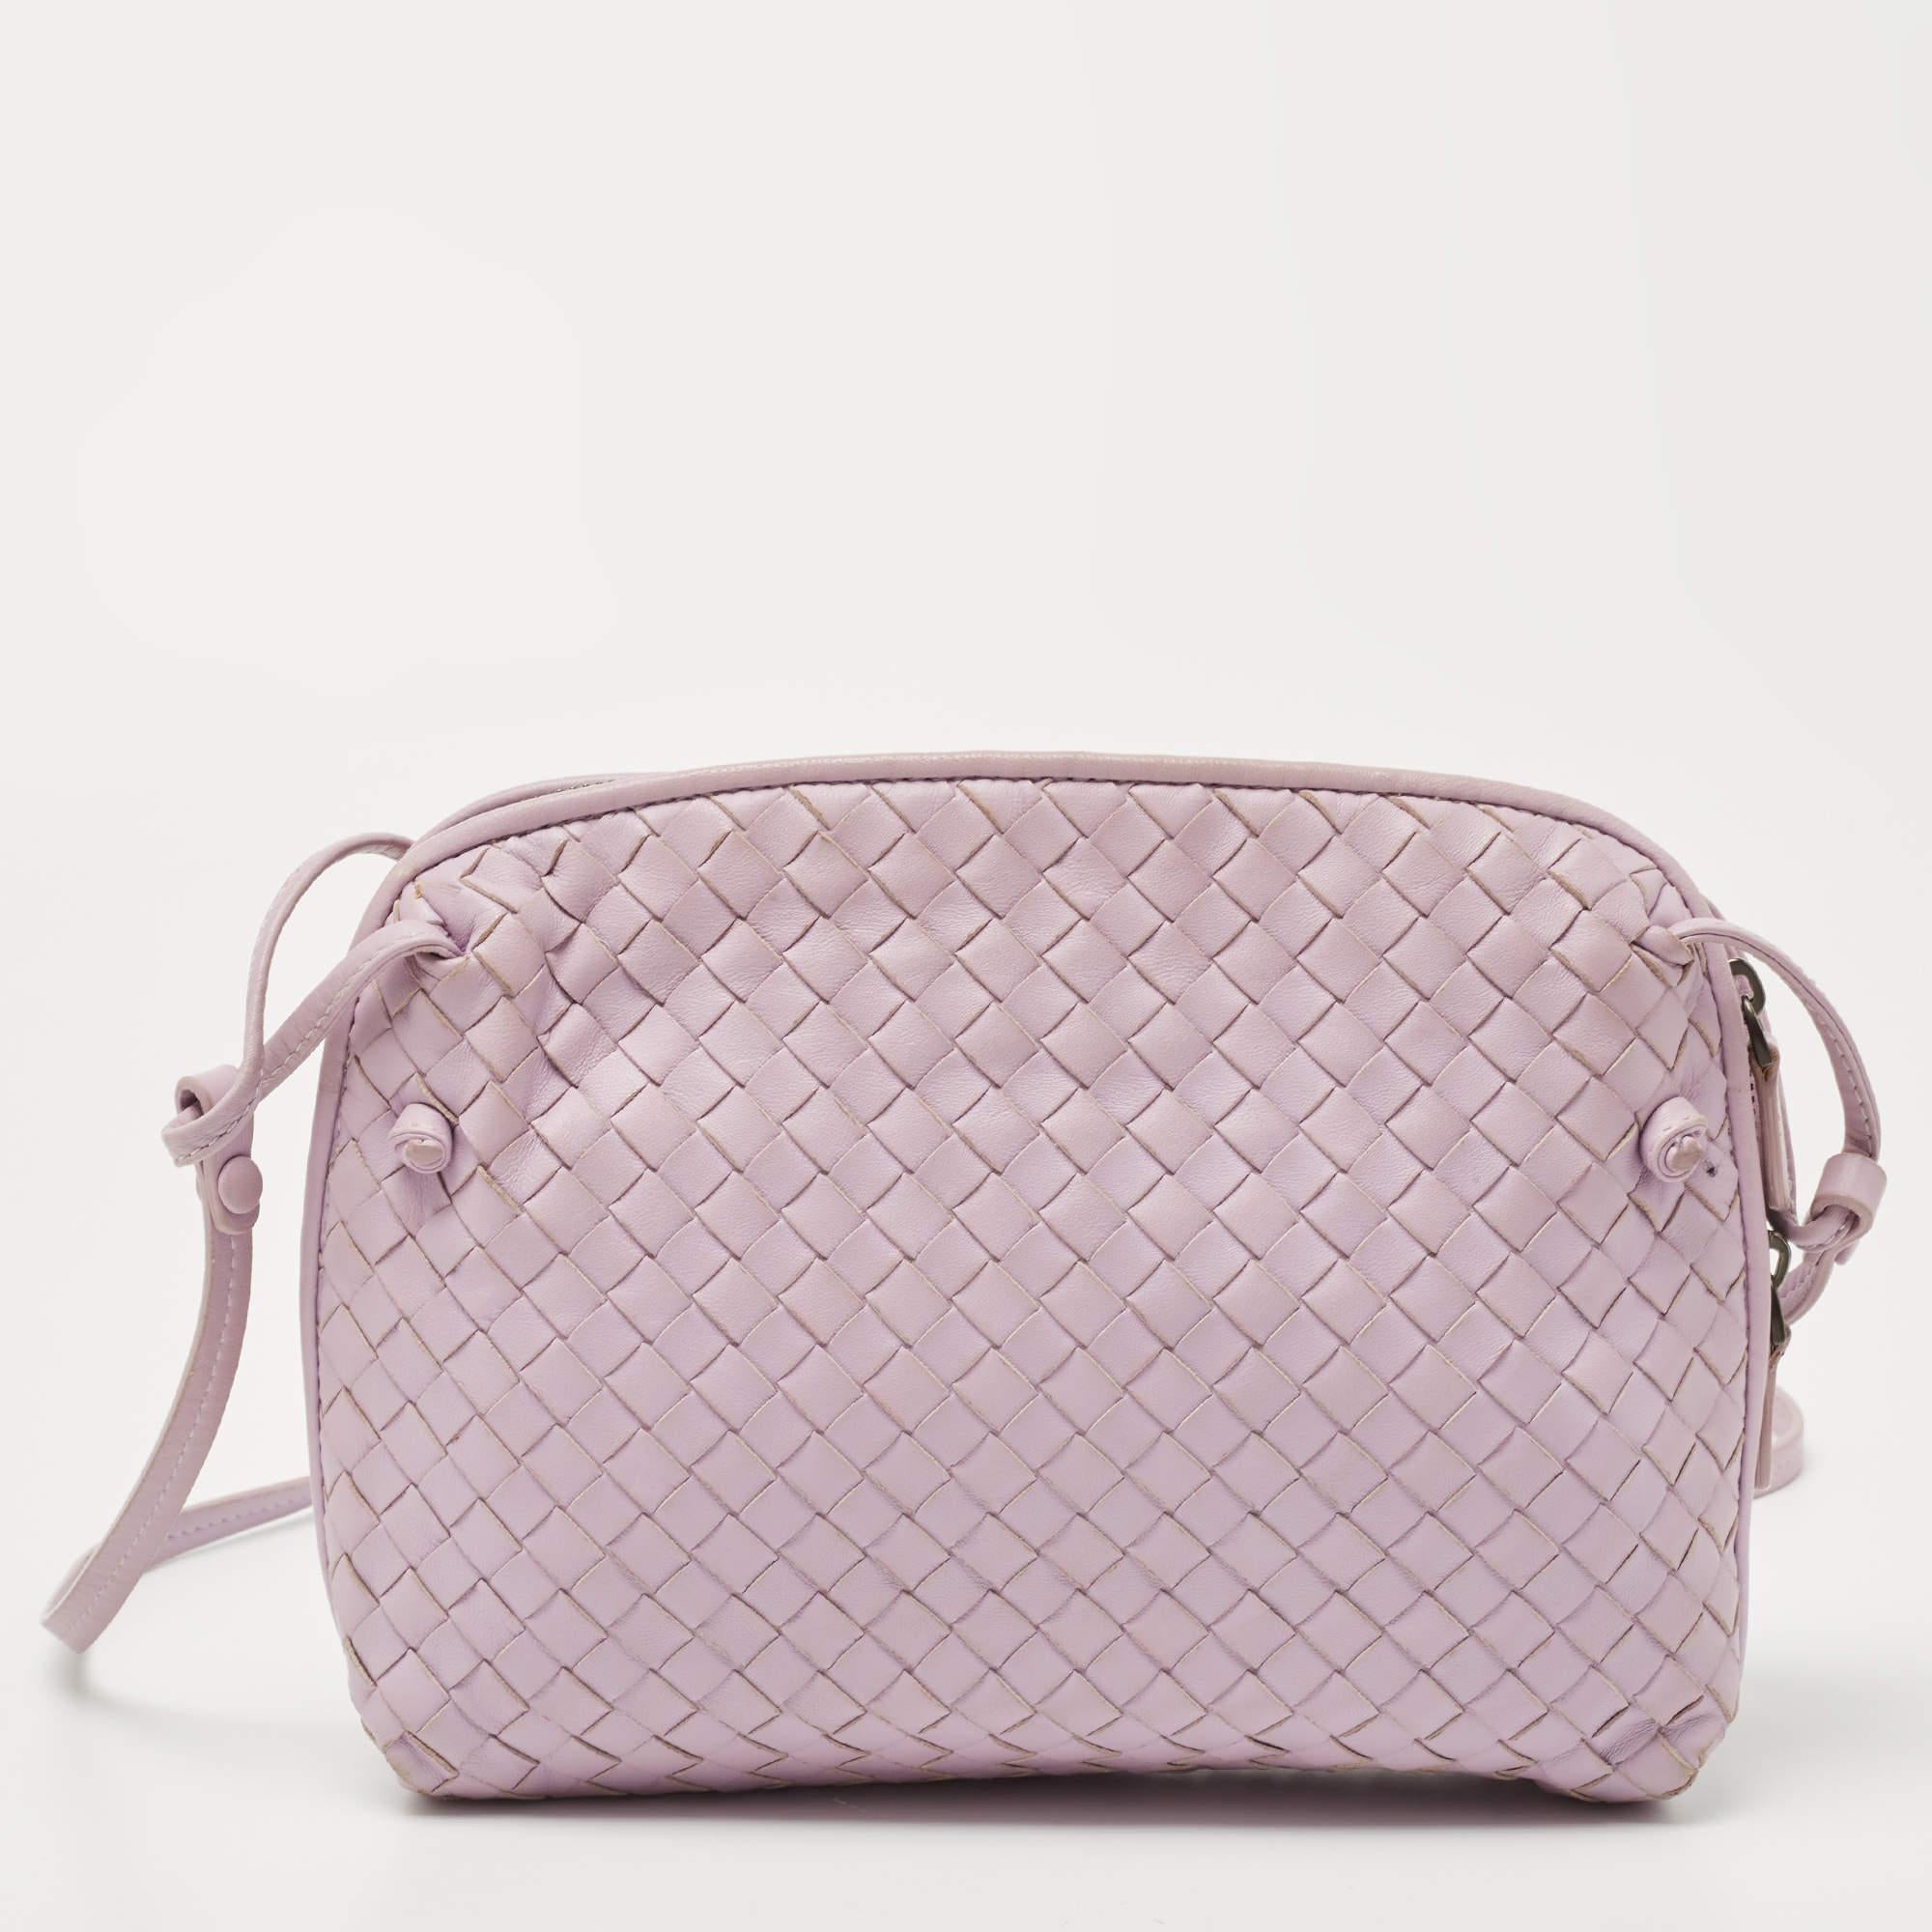 Swap that regular everyday tote with this charming crossbody bag from the house of Bottega Veneta. Sewn and assembled with care and love, the bag promises to boost your style and hold your daily essentials with great ease.

Includes: Original